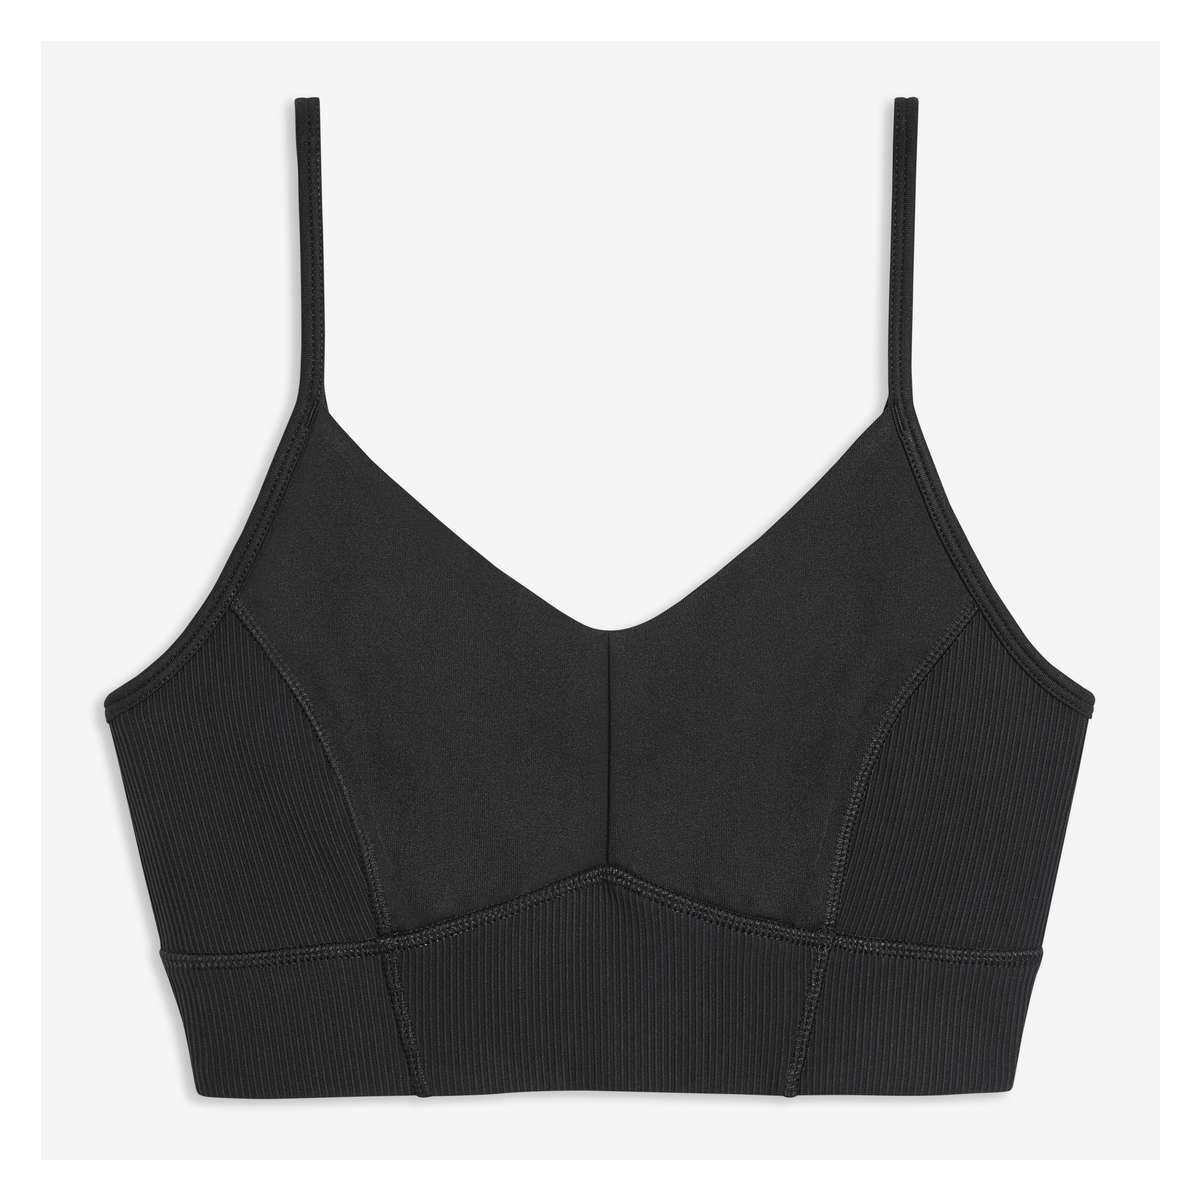 Reaction Sports Bra in Charcoal Marl - Glue Store